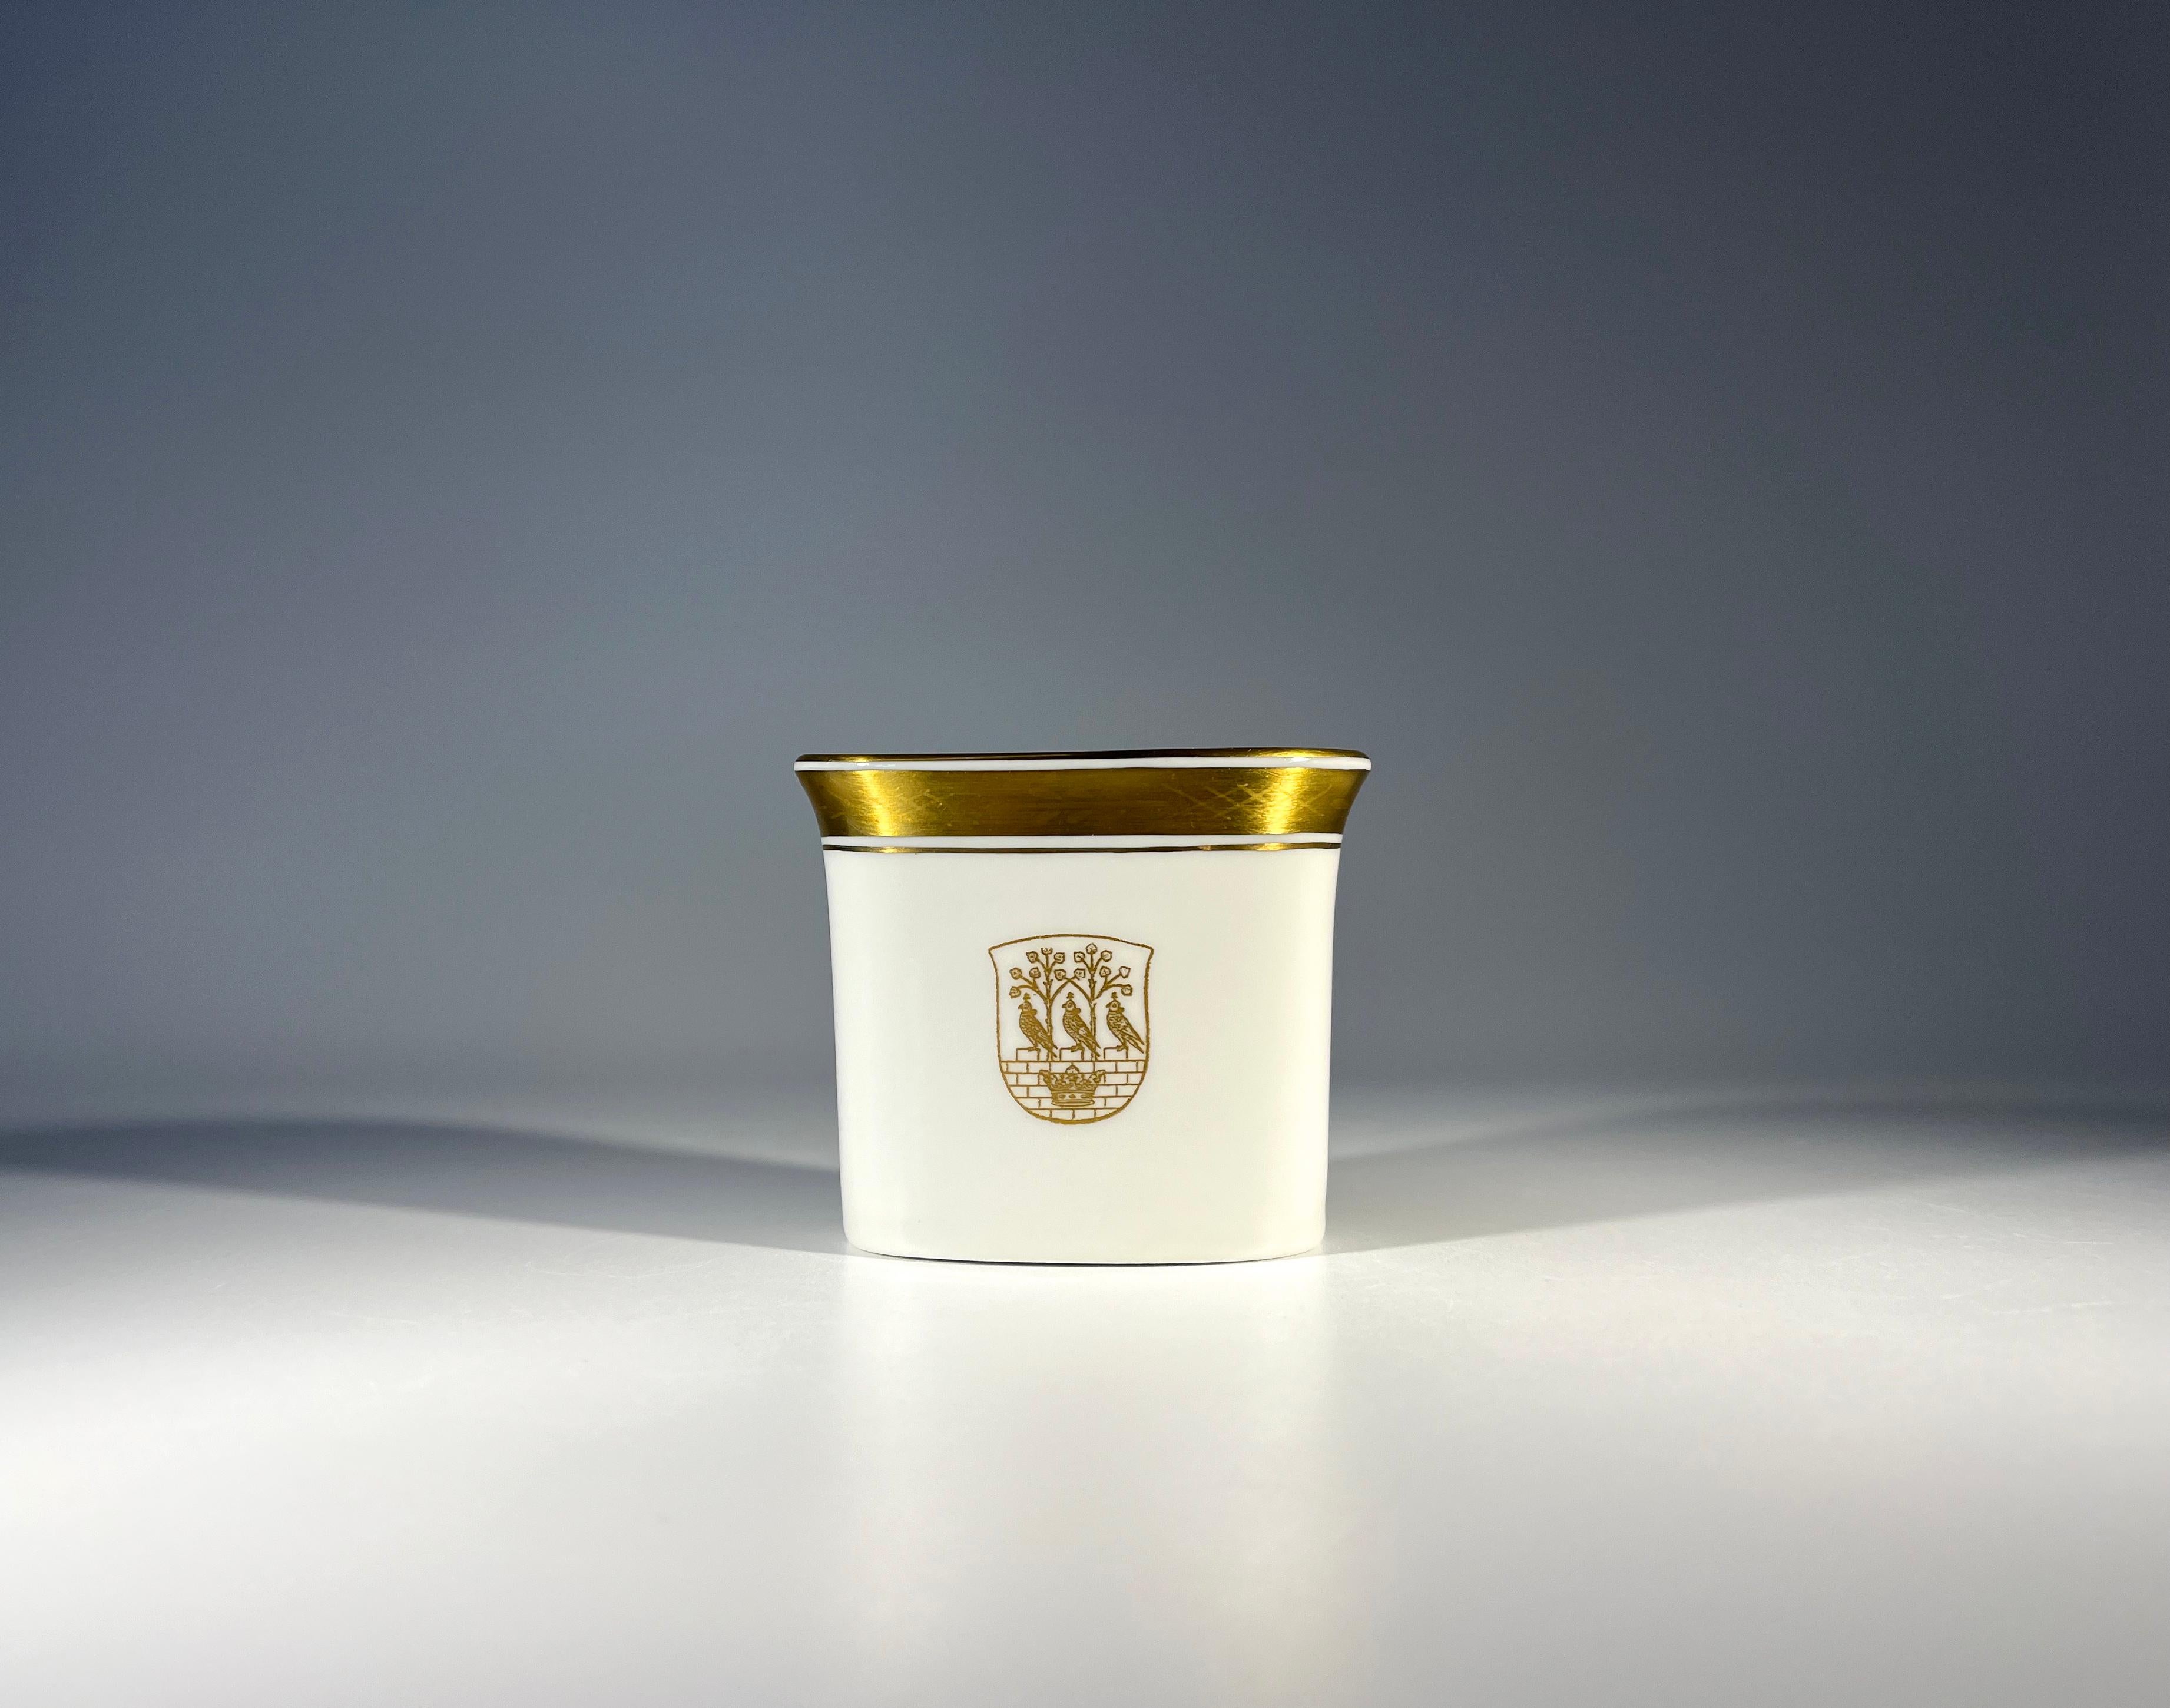 The Danish municipality of Frederiksberg coat of arms, adorns this elegant toothpick holder by Royal Copenhagen, Denmark
White porcelain with gilded decoration
Circa 1967
Stamped on base
Height 2.25 inch, Width 3 inch, Depth 2 inch
Excellent